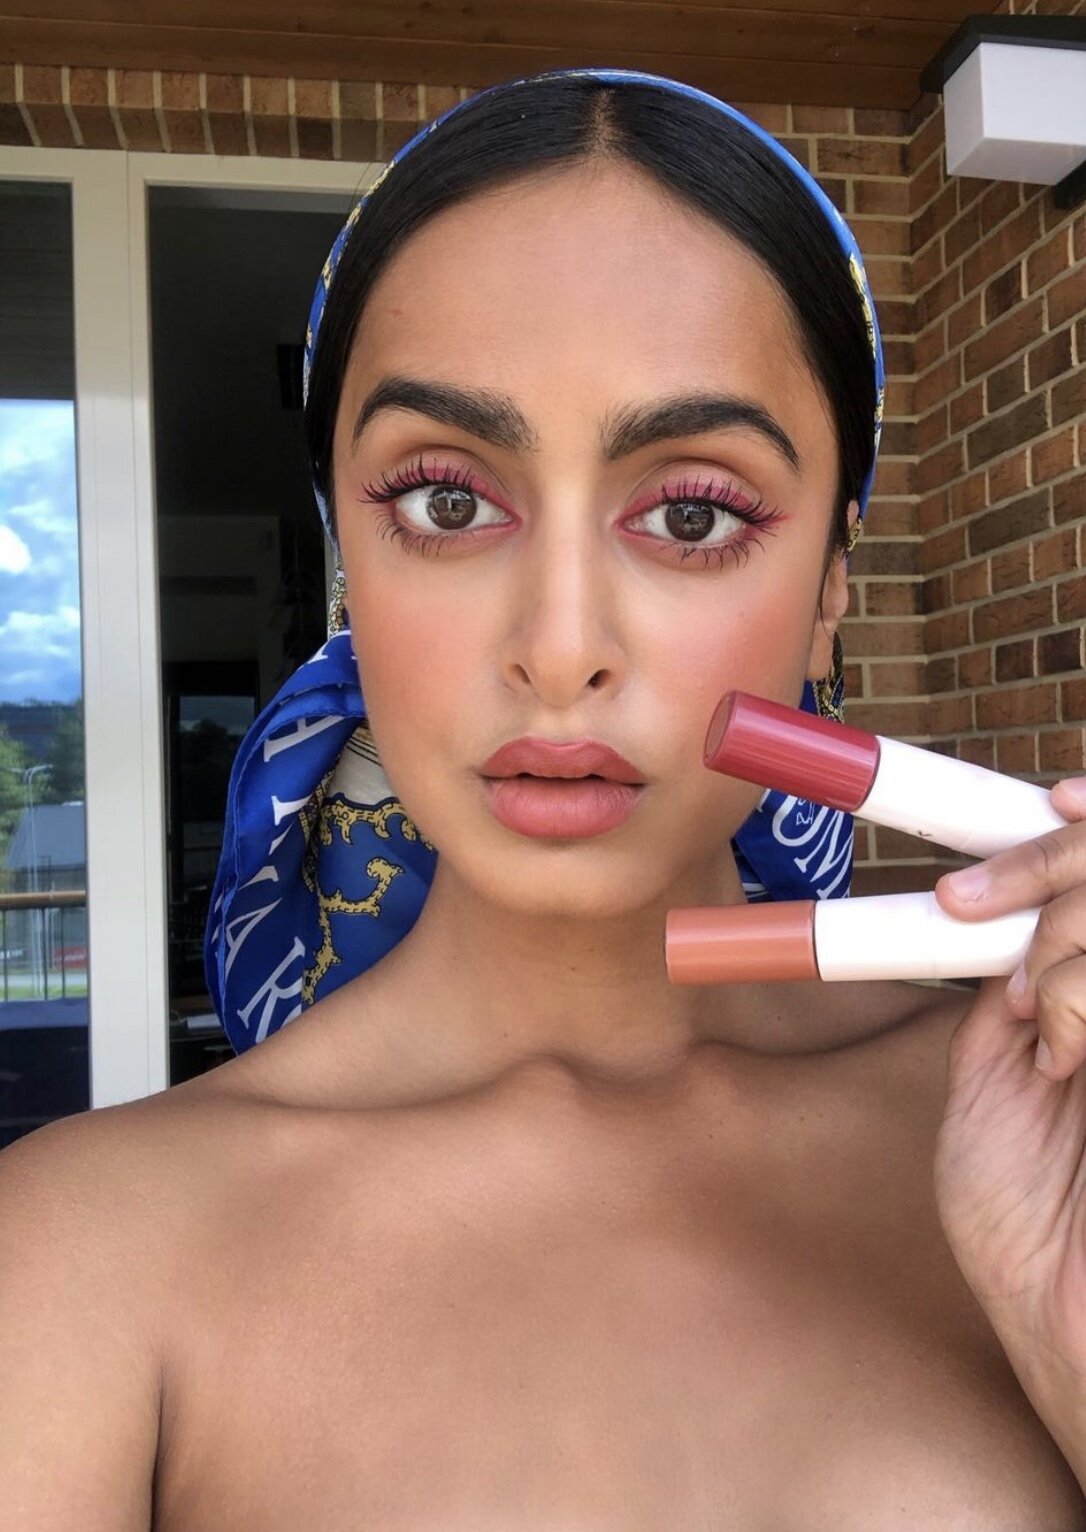 Tasneem Shahidullah is the founder and creator of TASNEEM Cosmetics, a beauty brand focused on celebrating all types of people, cultures and colours.Website: https://www.tasneemcosmetics.com/ Instagram: https://www.instagram.com/tasneemcosmetics/Facebook: https://www.facebook.com/tasneemcosmetics/Youtube: https://www.youtube.com/channel/UCfHBg05sm4ezfPSjSIkrEWA - Headshot credit to Instagram.